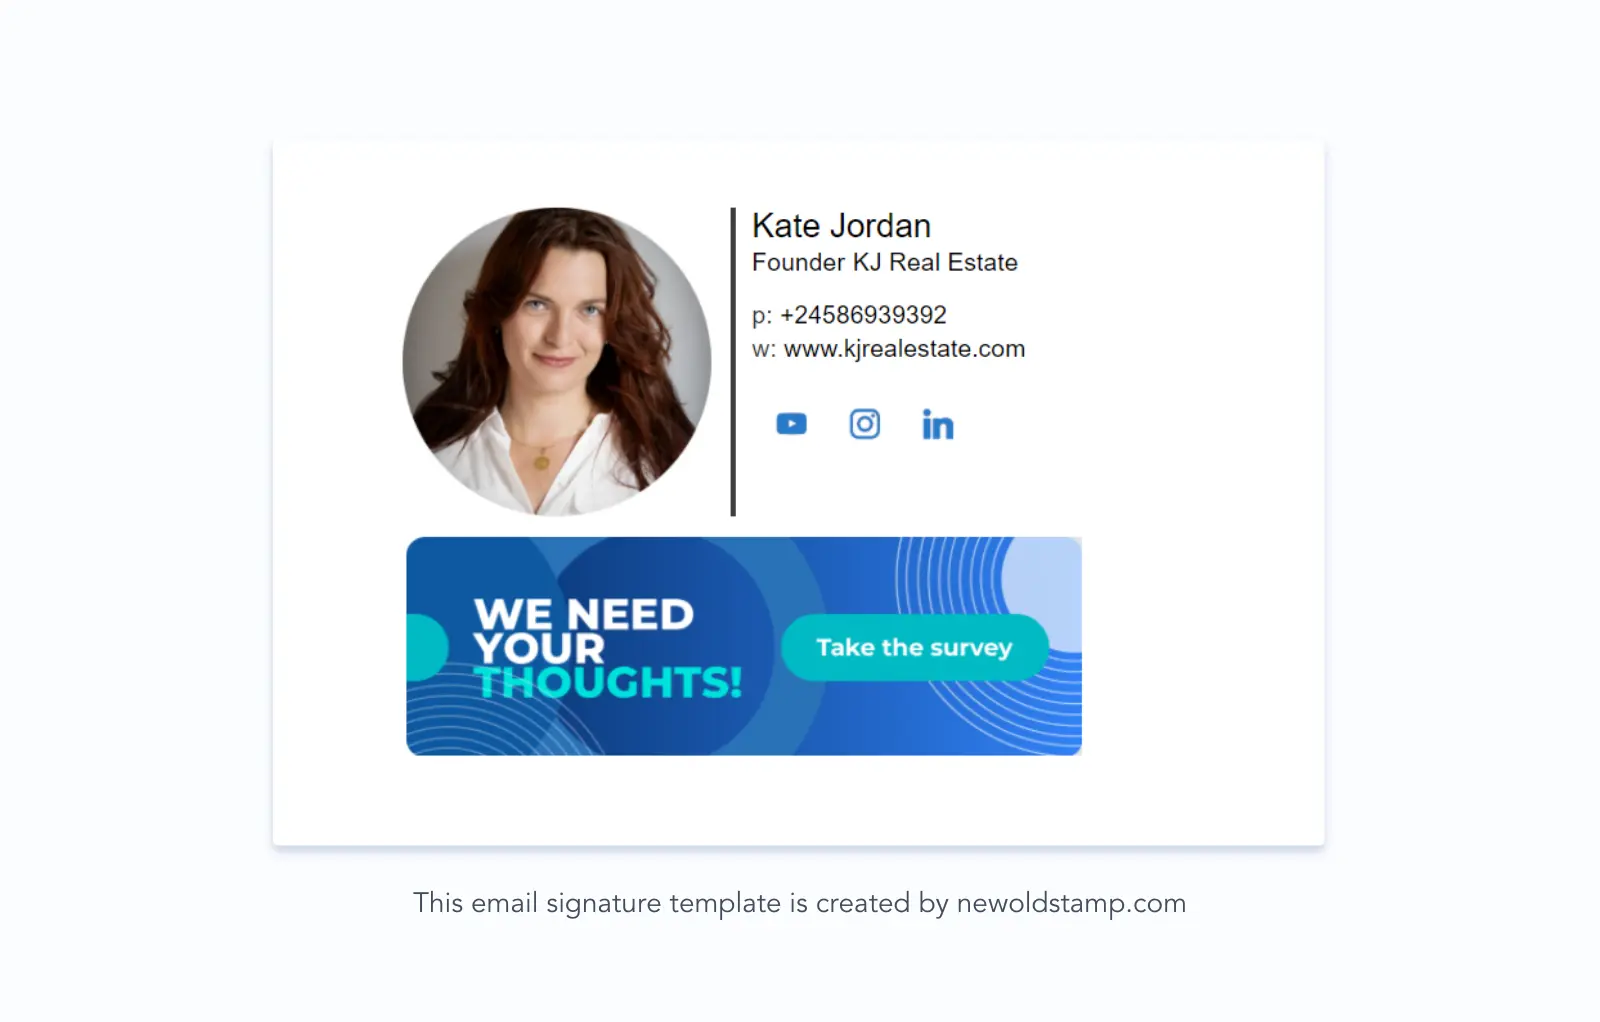 Linkedin icon in an email signature